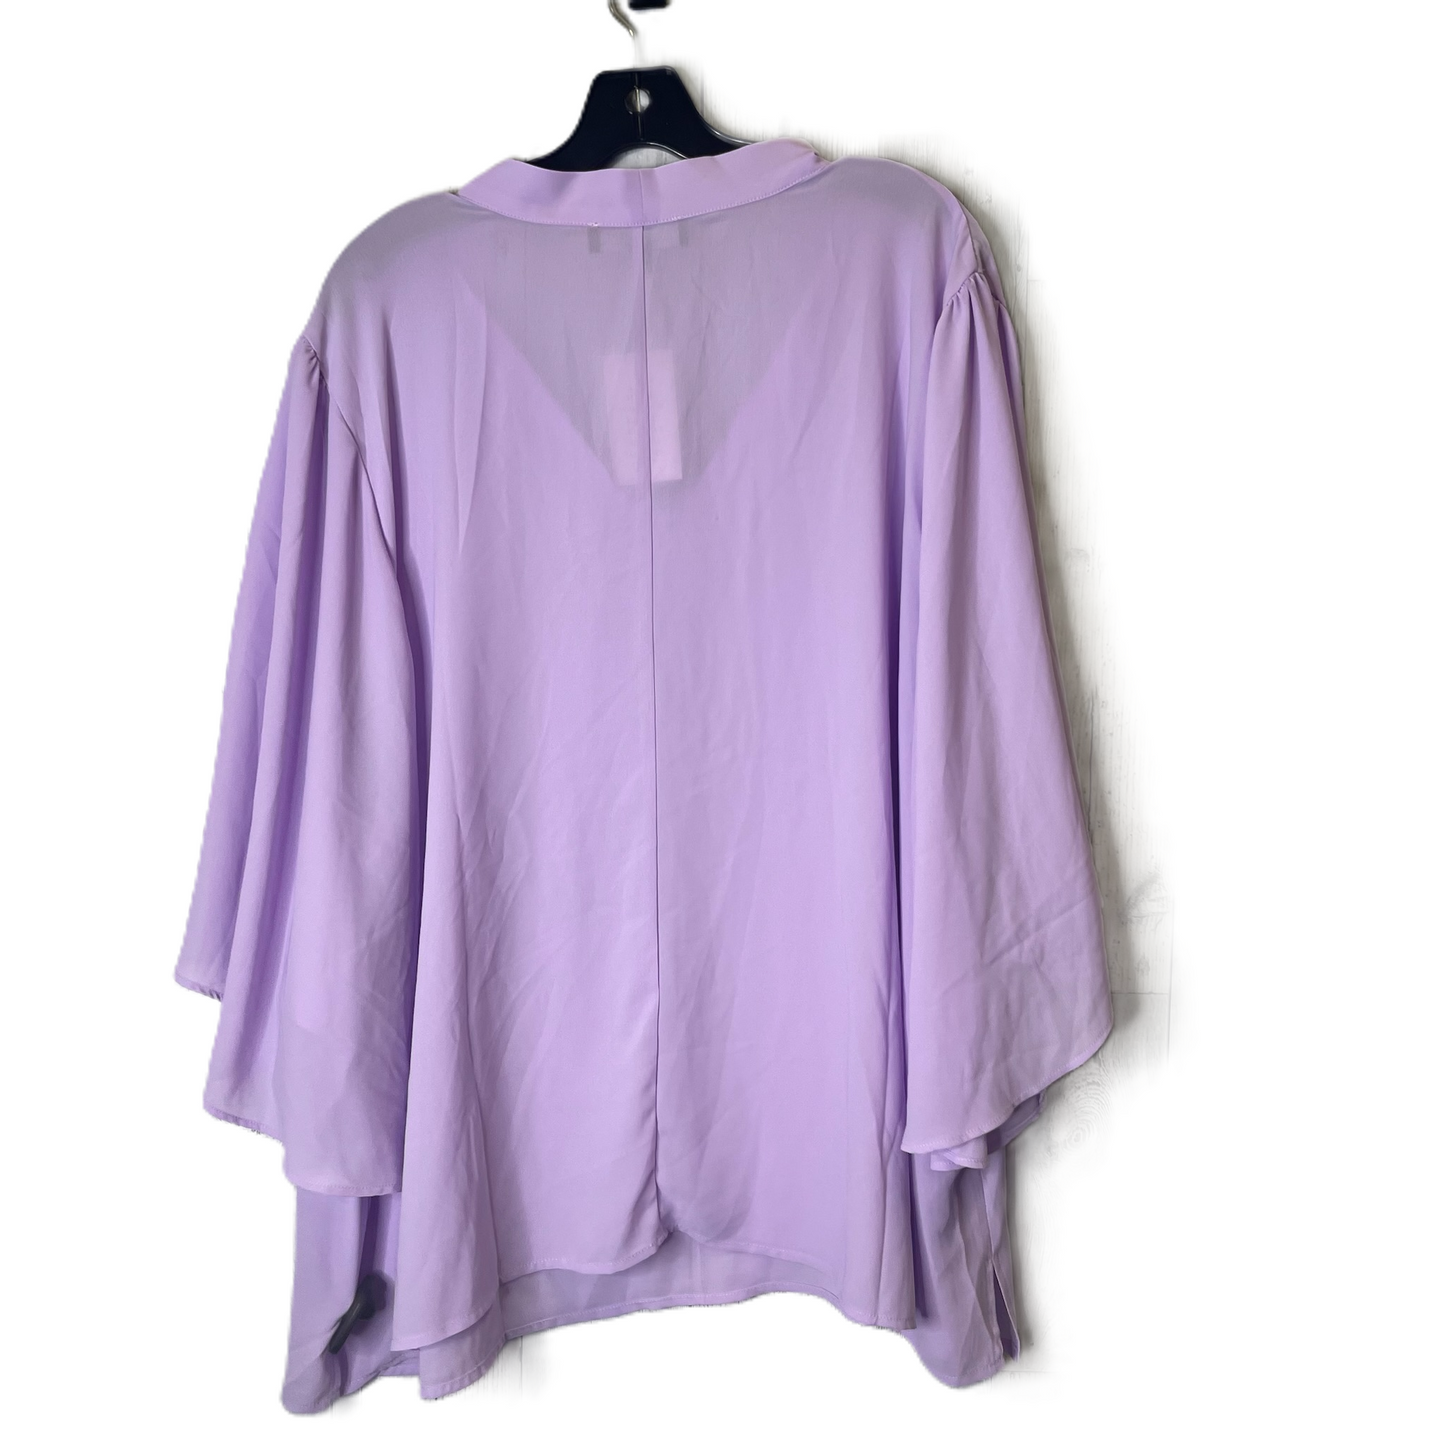 Purple Top Short Sleeve By Eloquii, Size: 4x